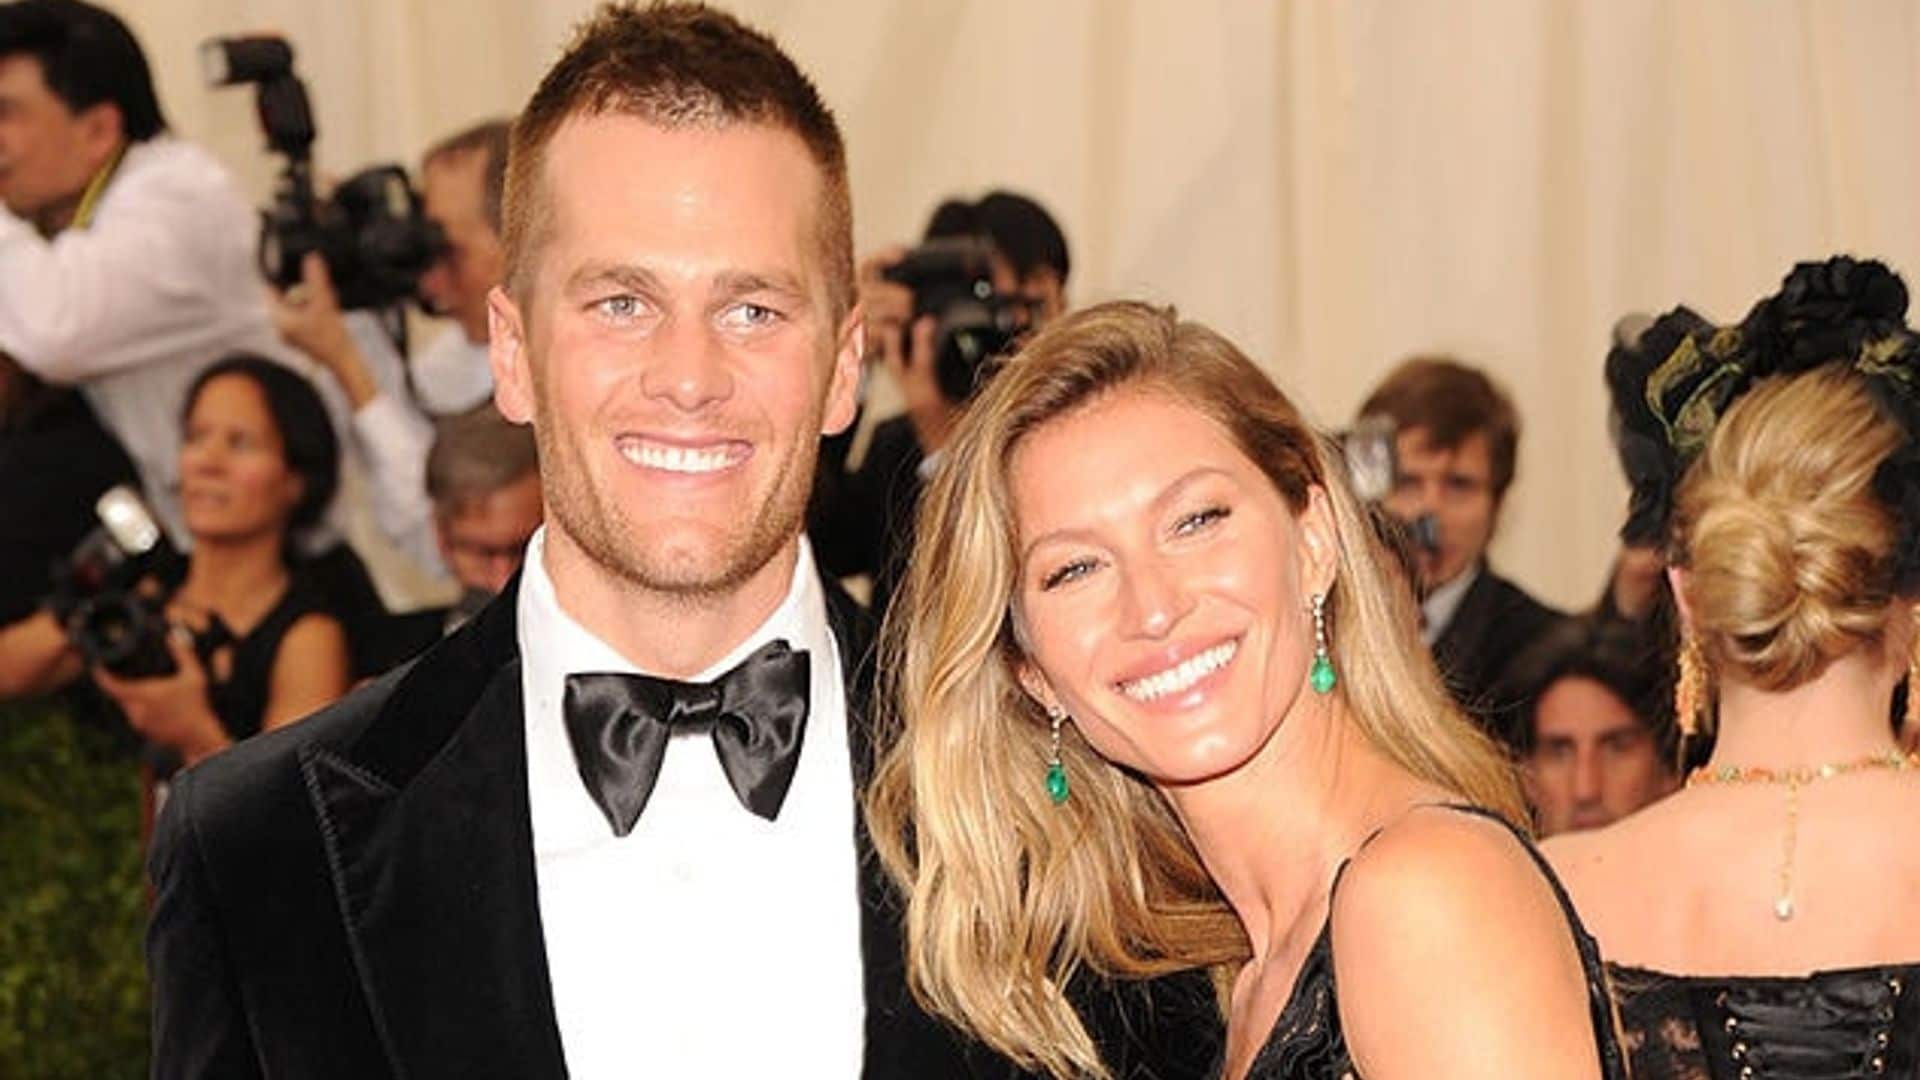 Gisele Bündchen and Tom Brady's vacation diet is just as strict as their home meals